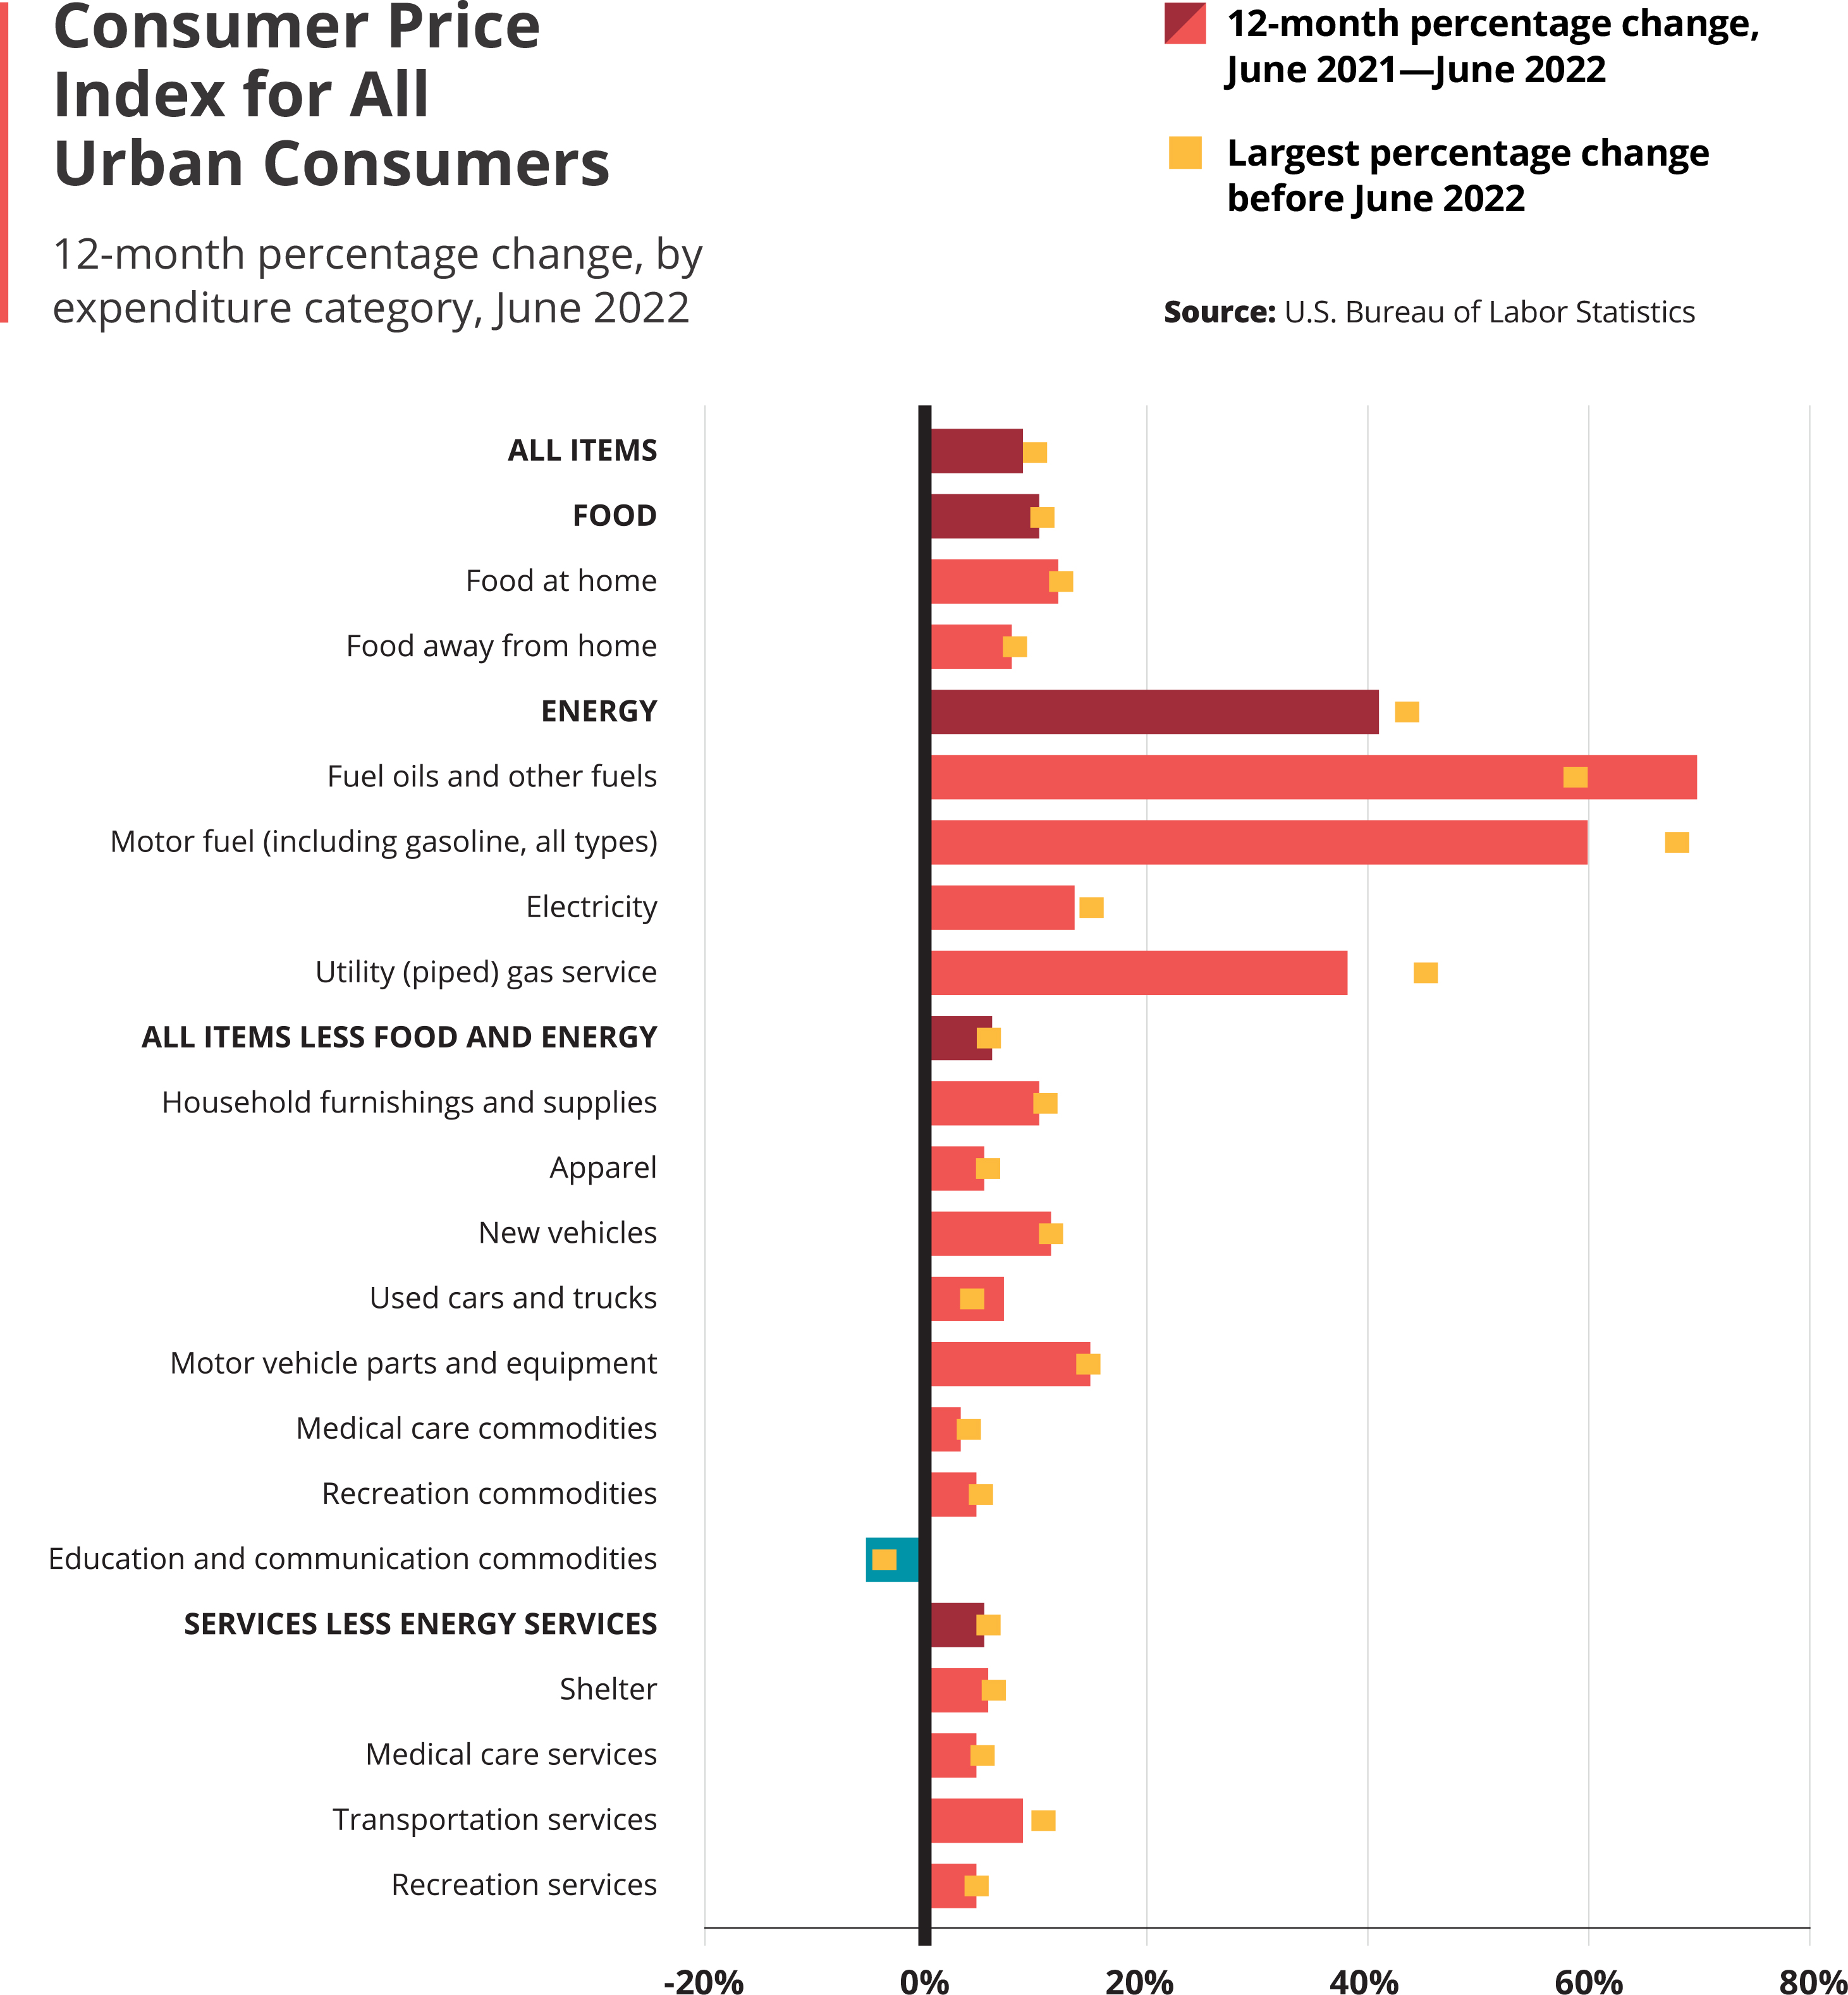 Consumer Price Index for All Urban Consumers: 12-month percentage change, by expenditure category, June 2022